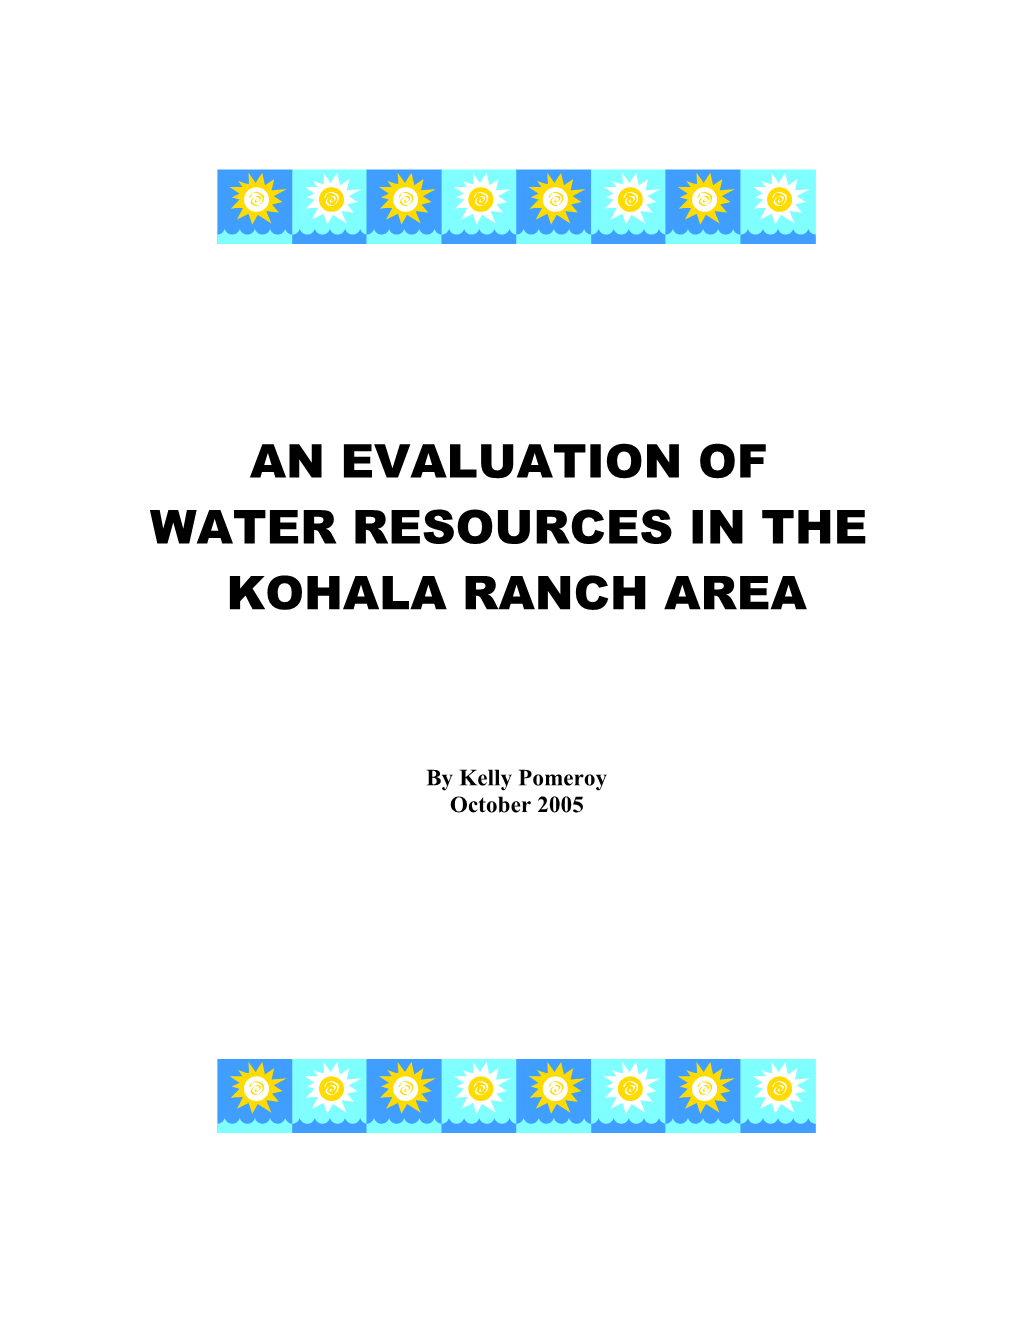 Water Resources in The